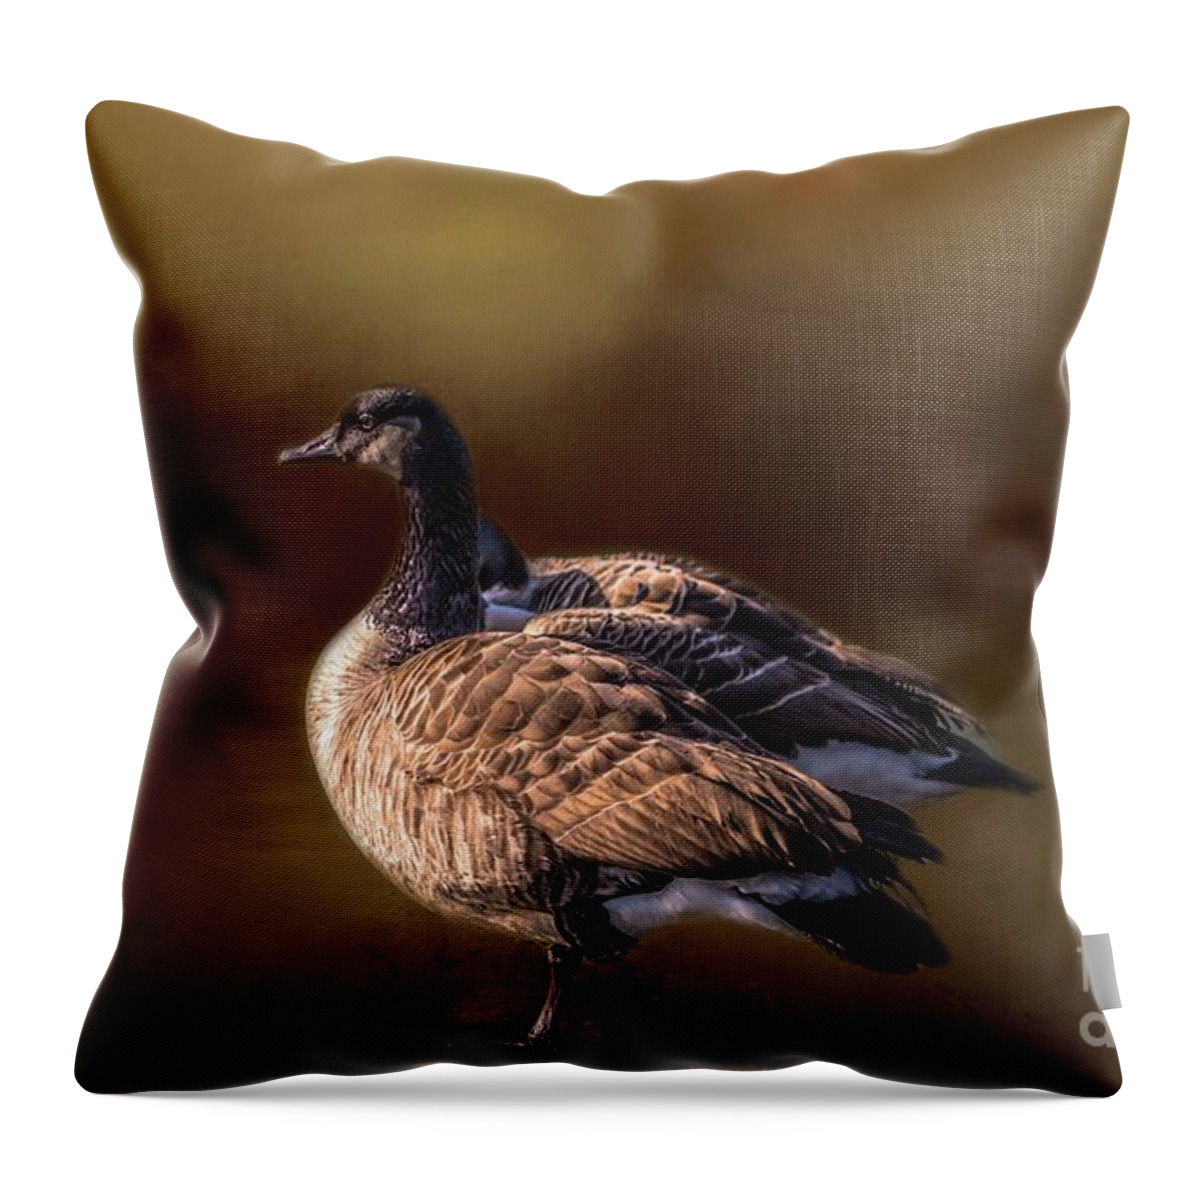 Canada Geese Throw Pillow featuring the photograph Canada Geese by Eva Lechner